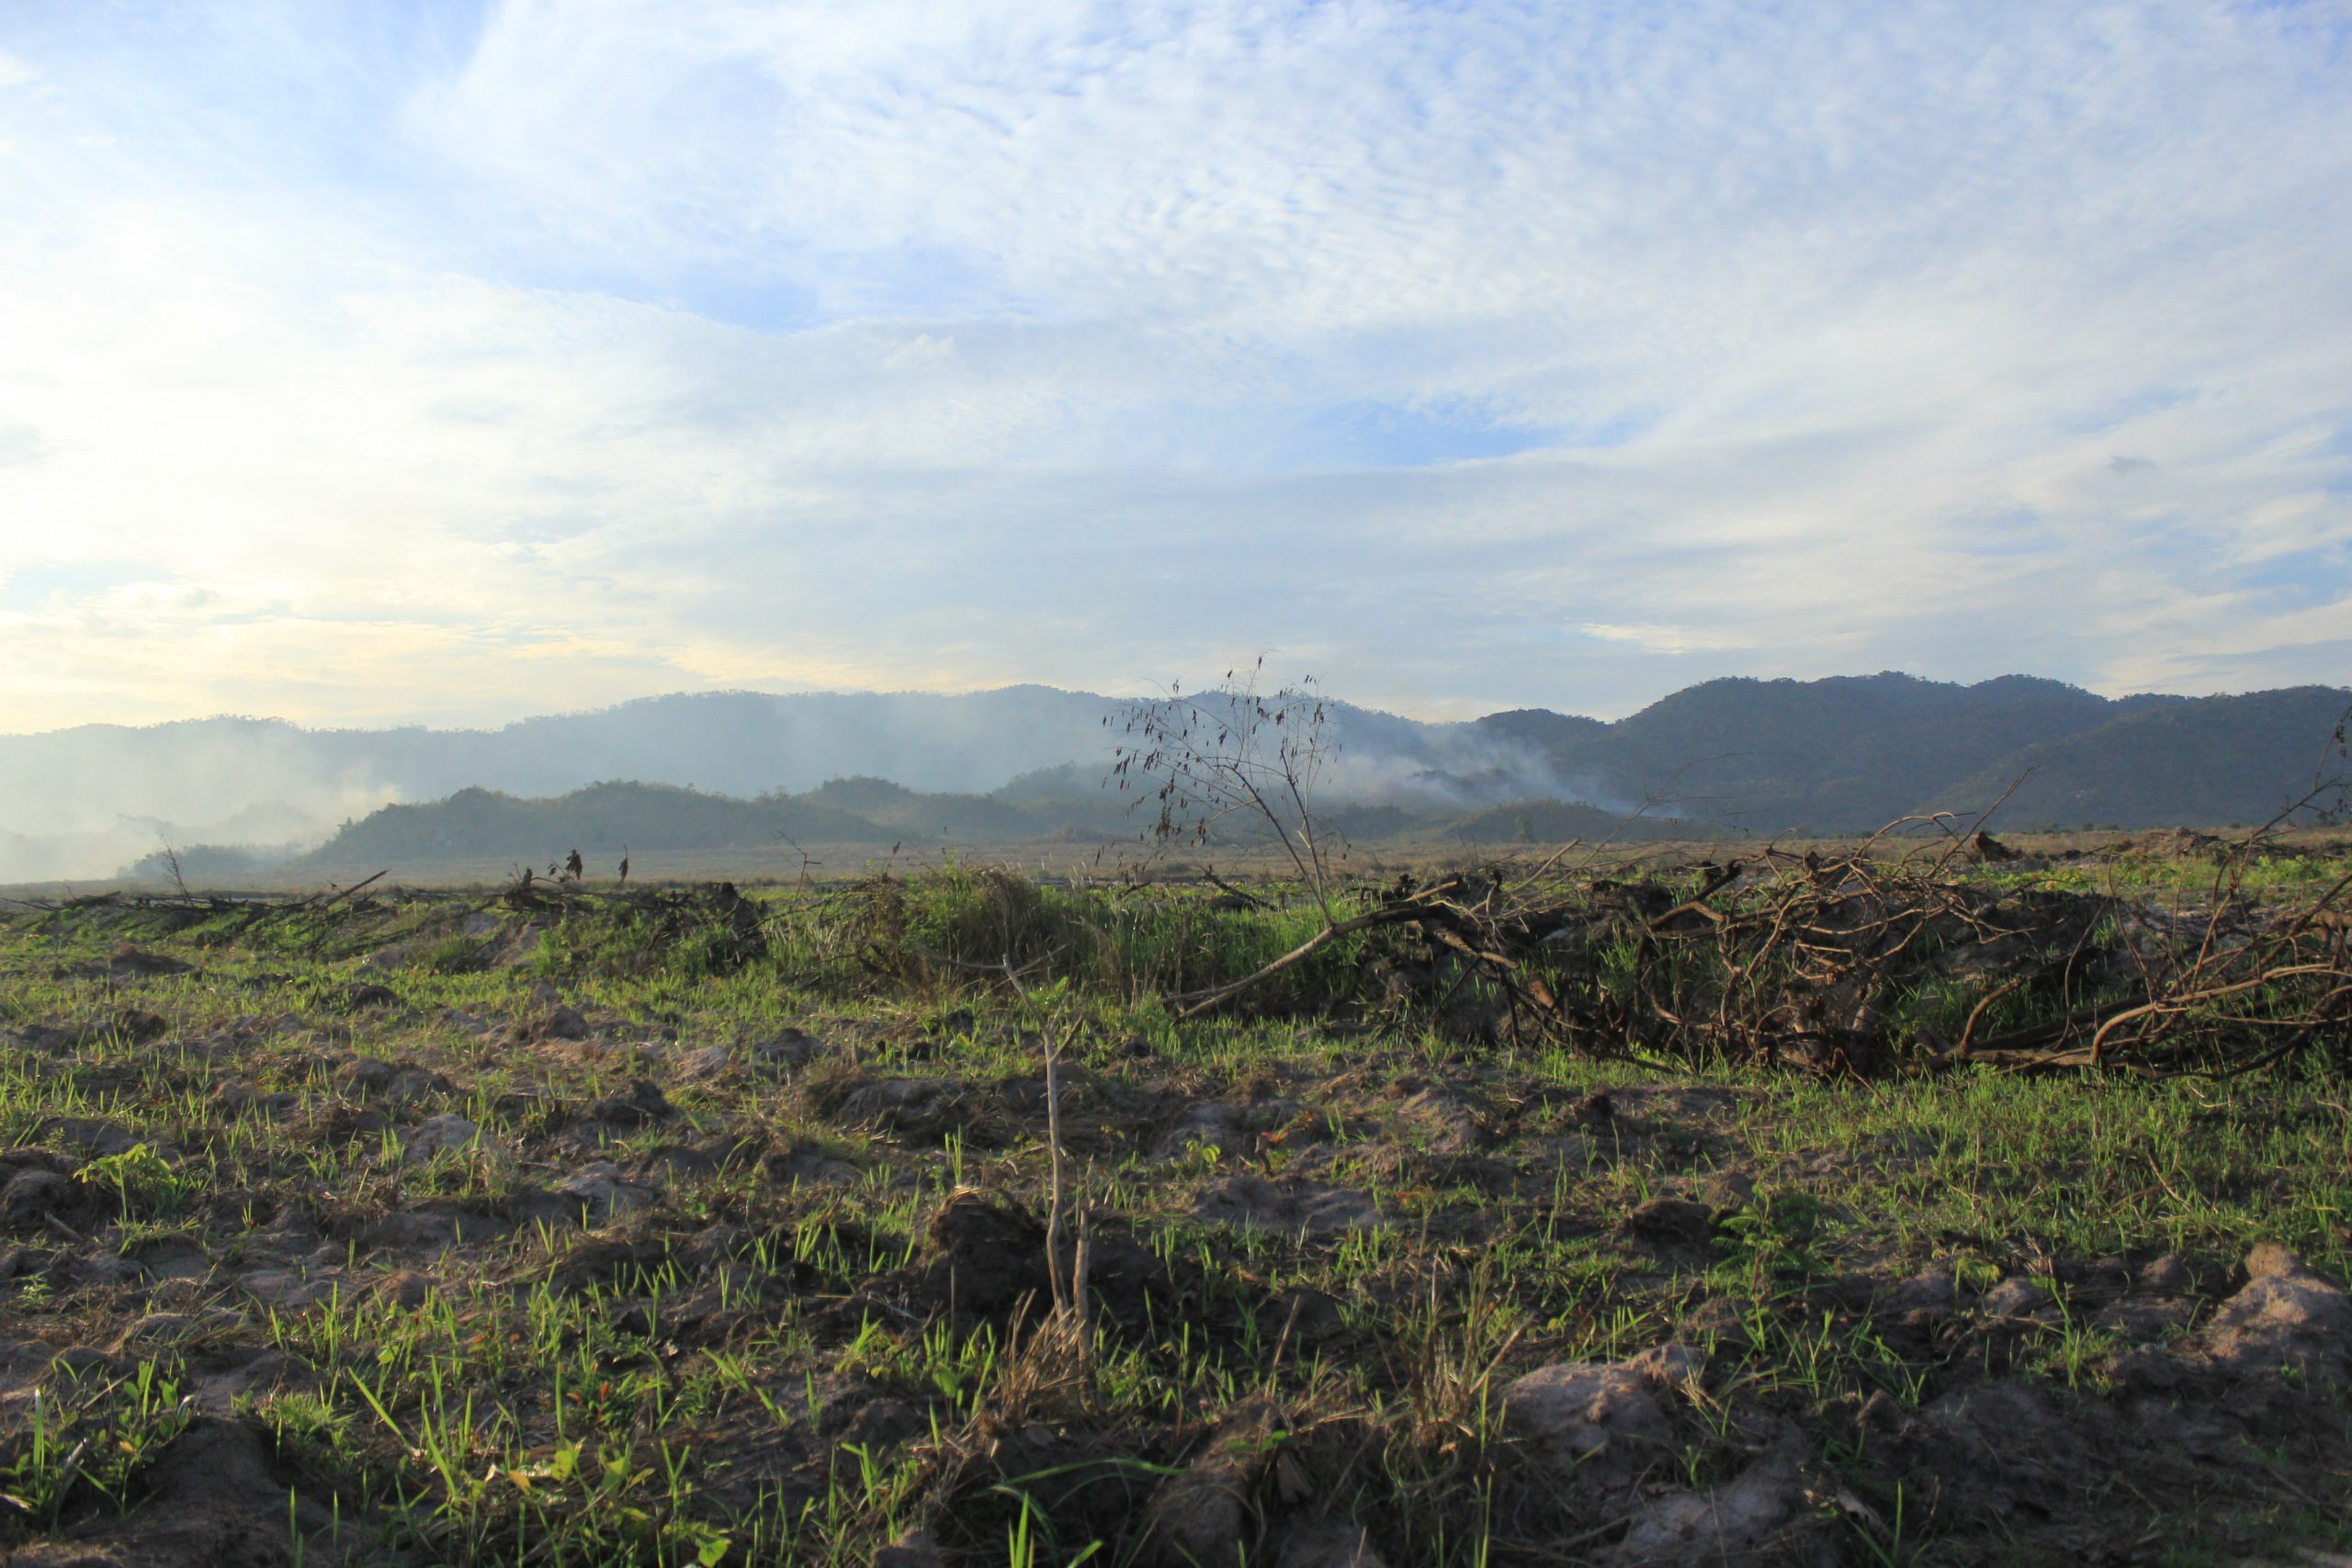 A deforested section of land up the road from woodlands where a group of soldiers allegedly assaulted locals on Tuesday outside Po Meas village in Kampong Speu. The disputed forest area is in the mountainous Oral district. (Andrew Haffner/VOD)